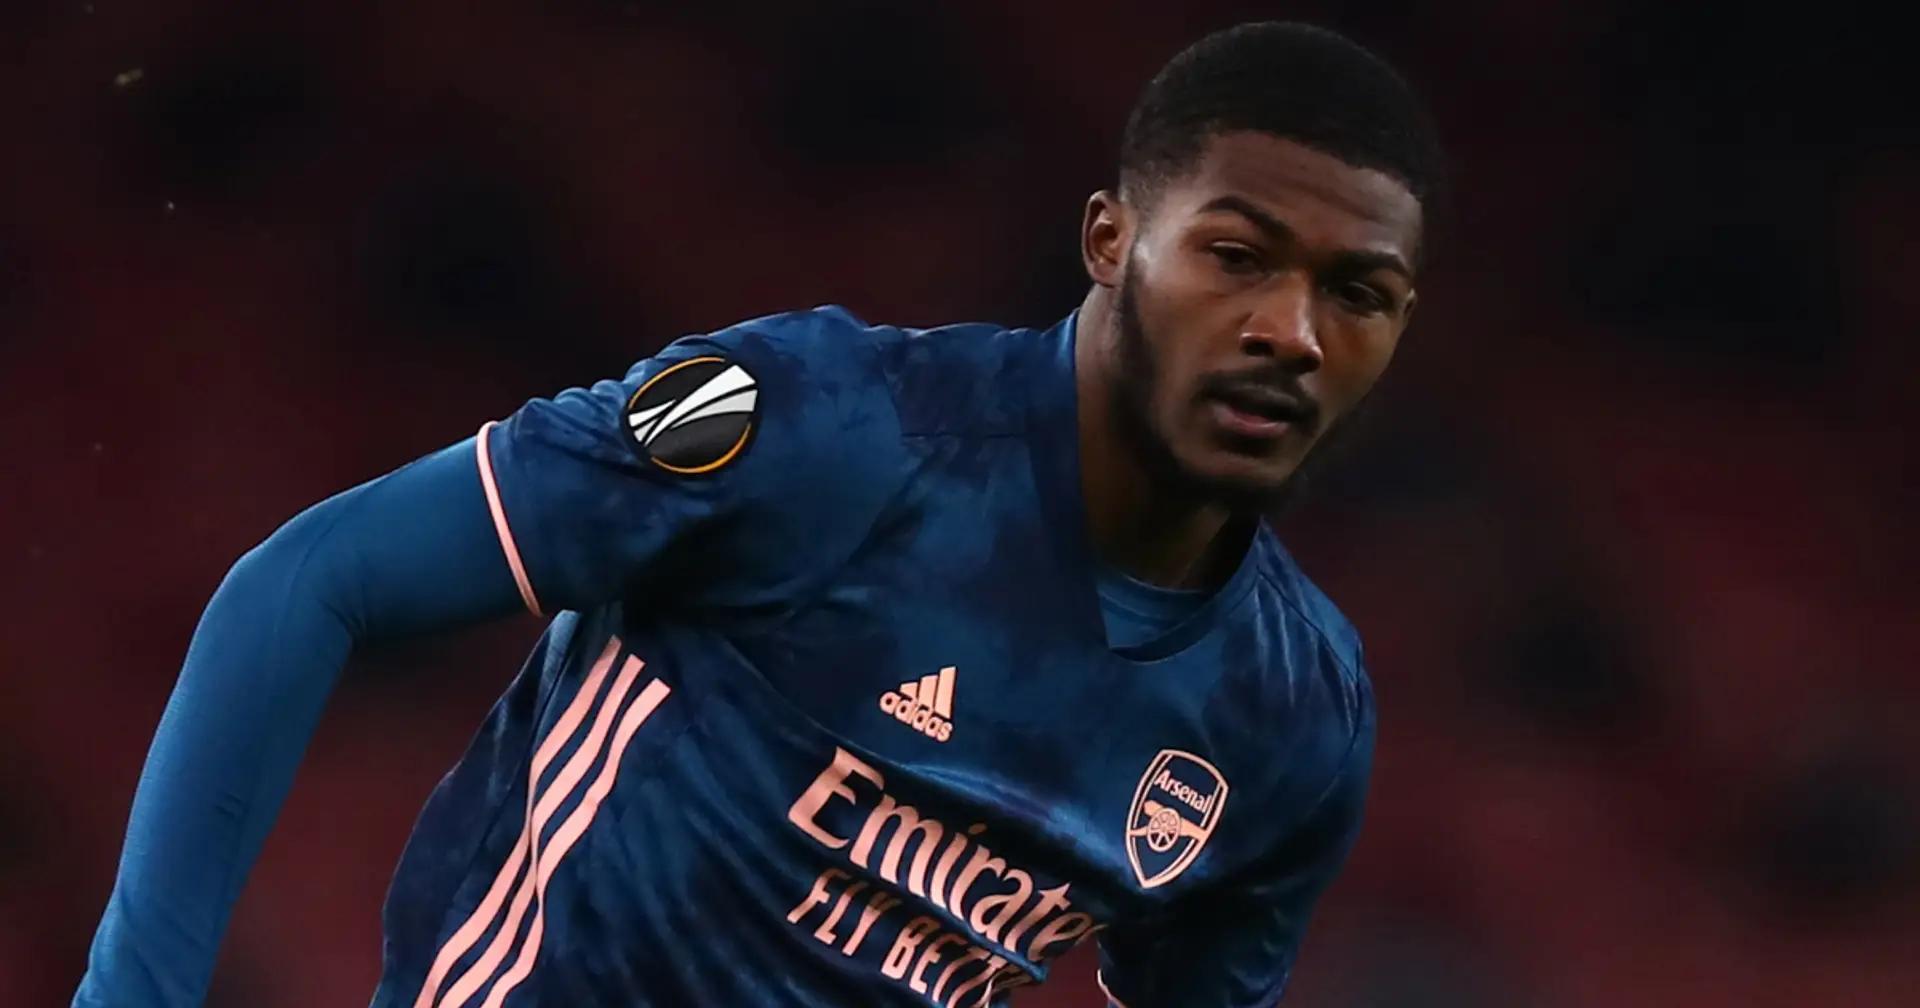 'We need people with the mindset to score goals': Arteta impressed with Maitland-Niles' and Smith Rowe's displays